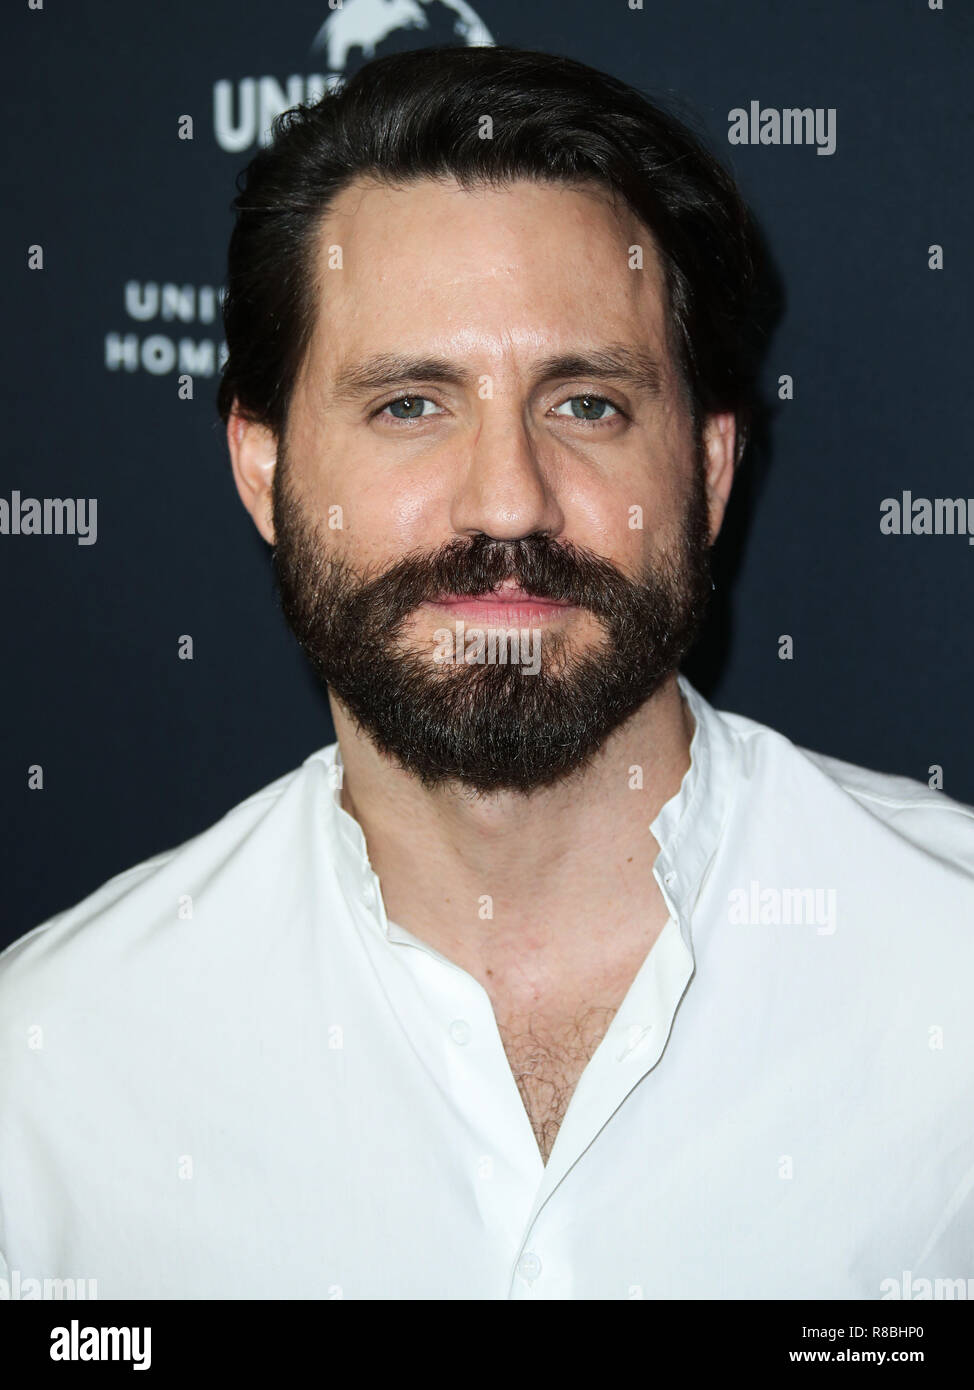 WEST HOLLYWOOD, LOS ANGELES, CA, USA - SEPTEMBER 16: Edgar Ramirez at the Universal Pictures Home Entertainment Content Group's 'Loving Pablo' Special Screening held at The London West Hollywood at Beverly Hills on September 16, 2018 in West Hollywood, Los Angeles, California, United States. (Photo by Xavier Collin/Image Press Agency) Stock Photo